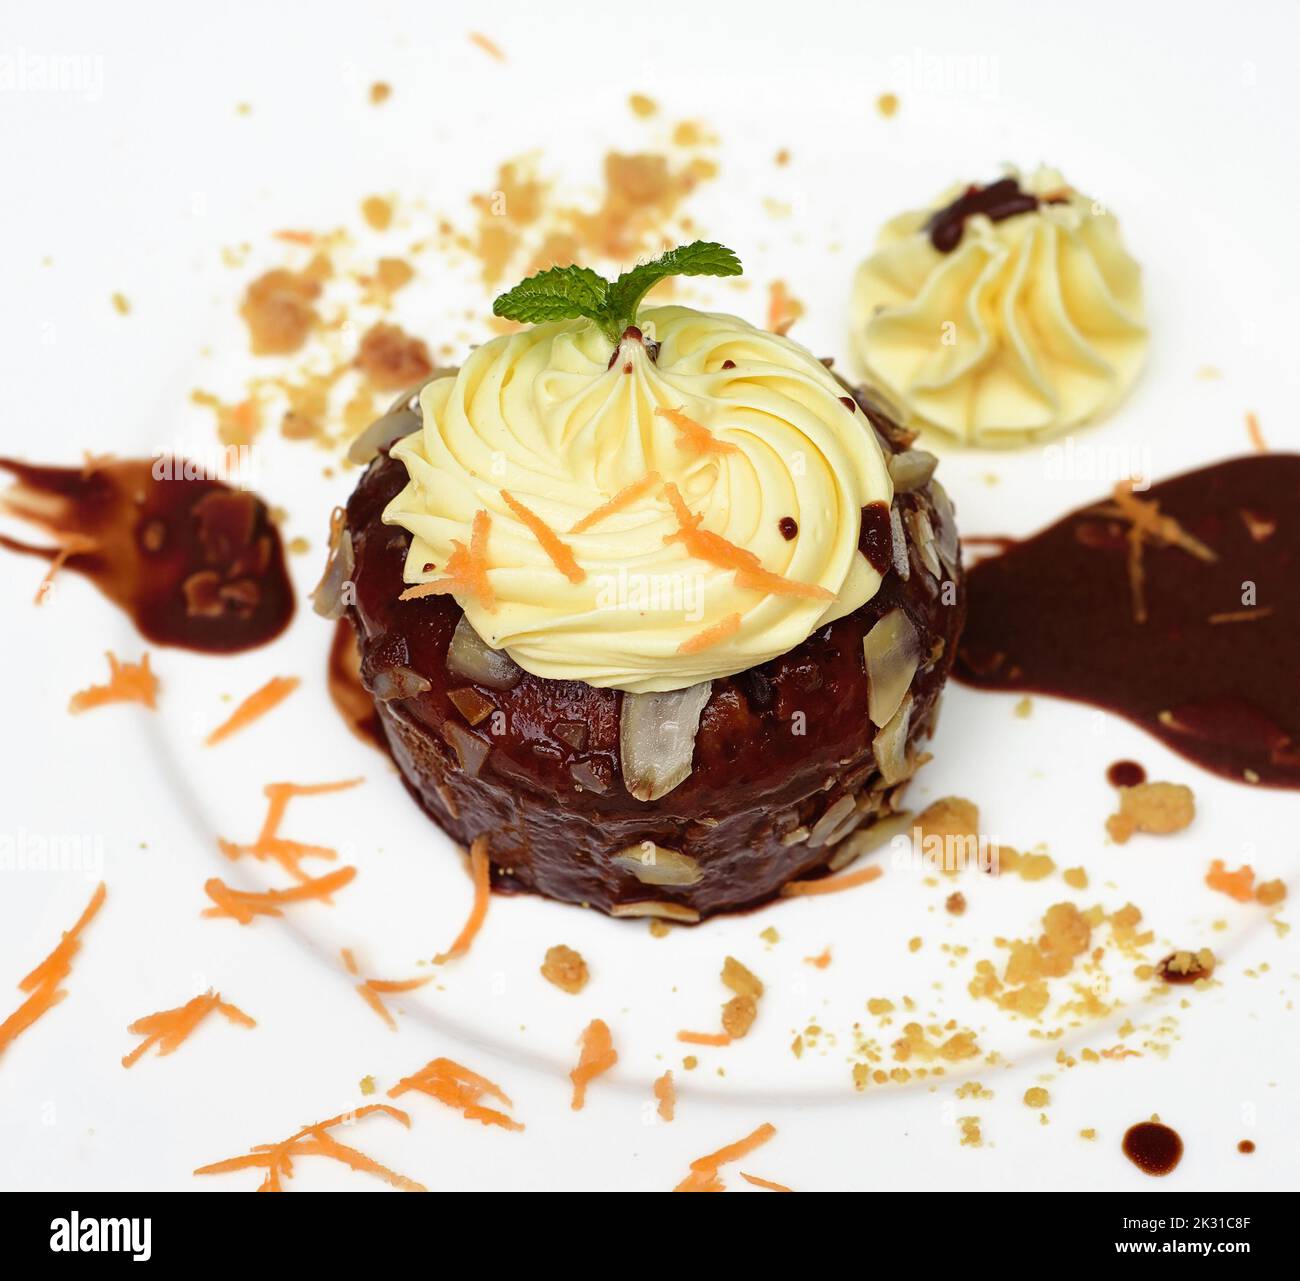 Carrot chocolate cake on plate and black background Stock Photo